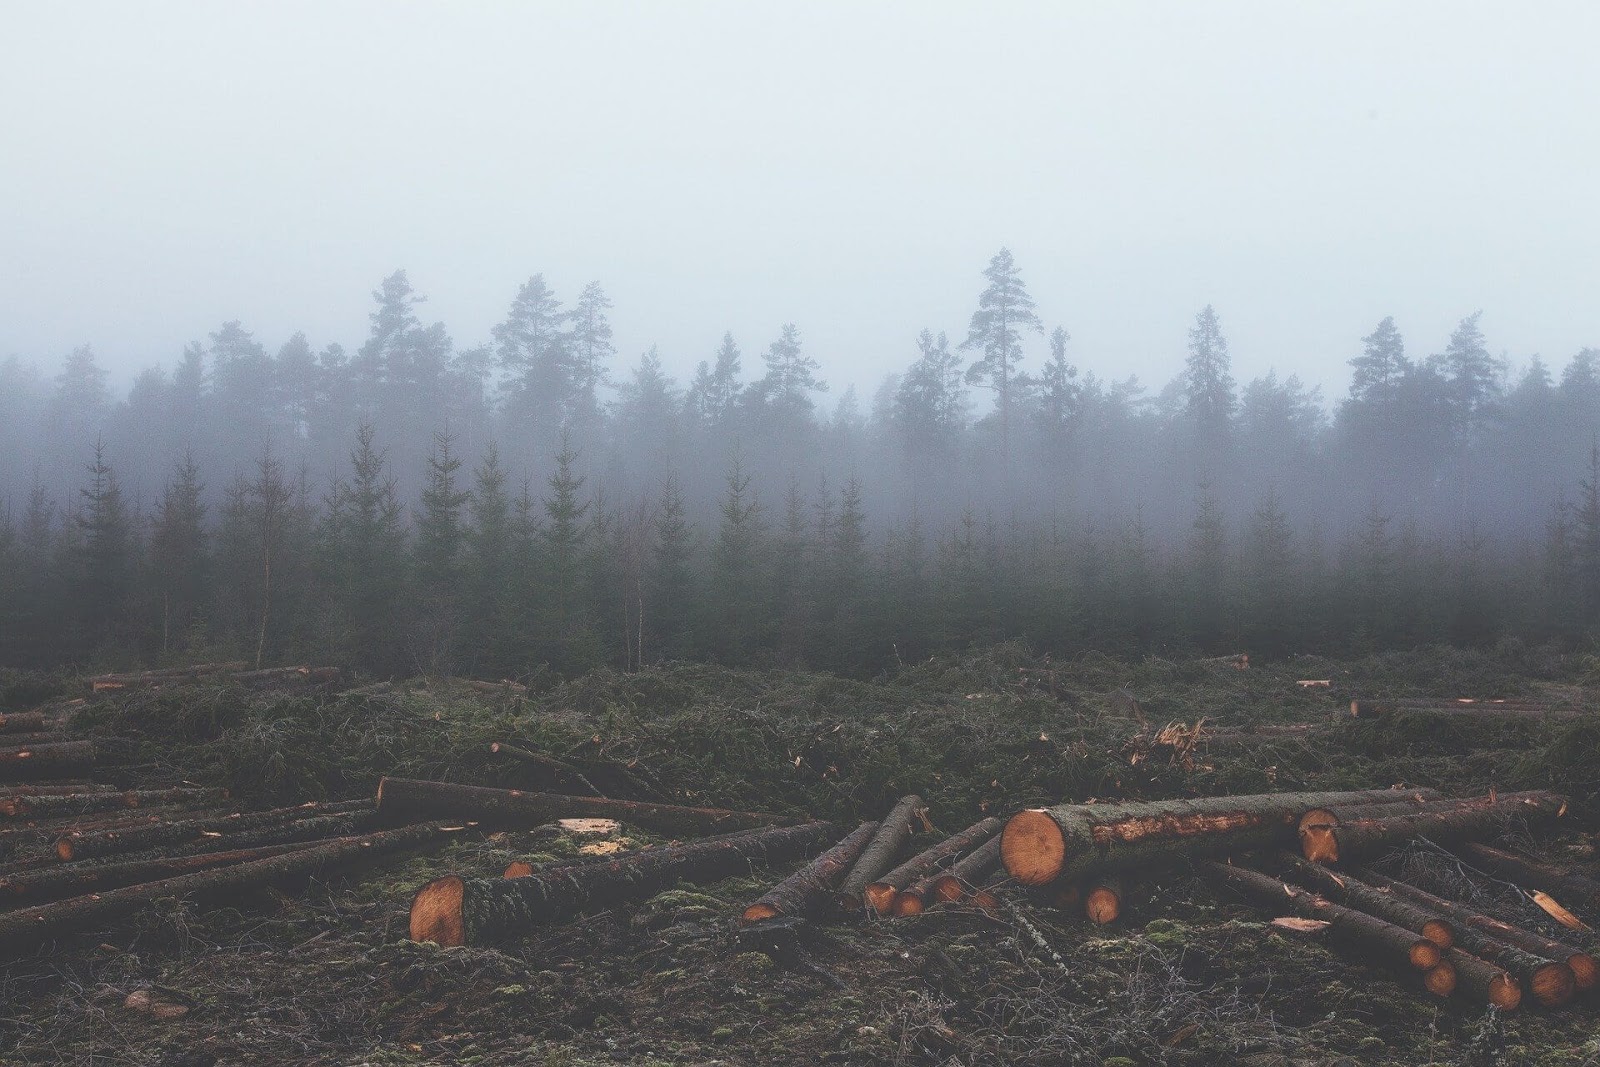 Felled logs in front of a forest